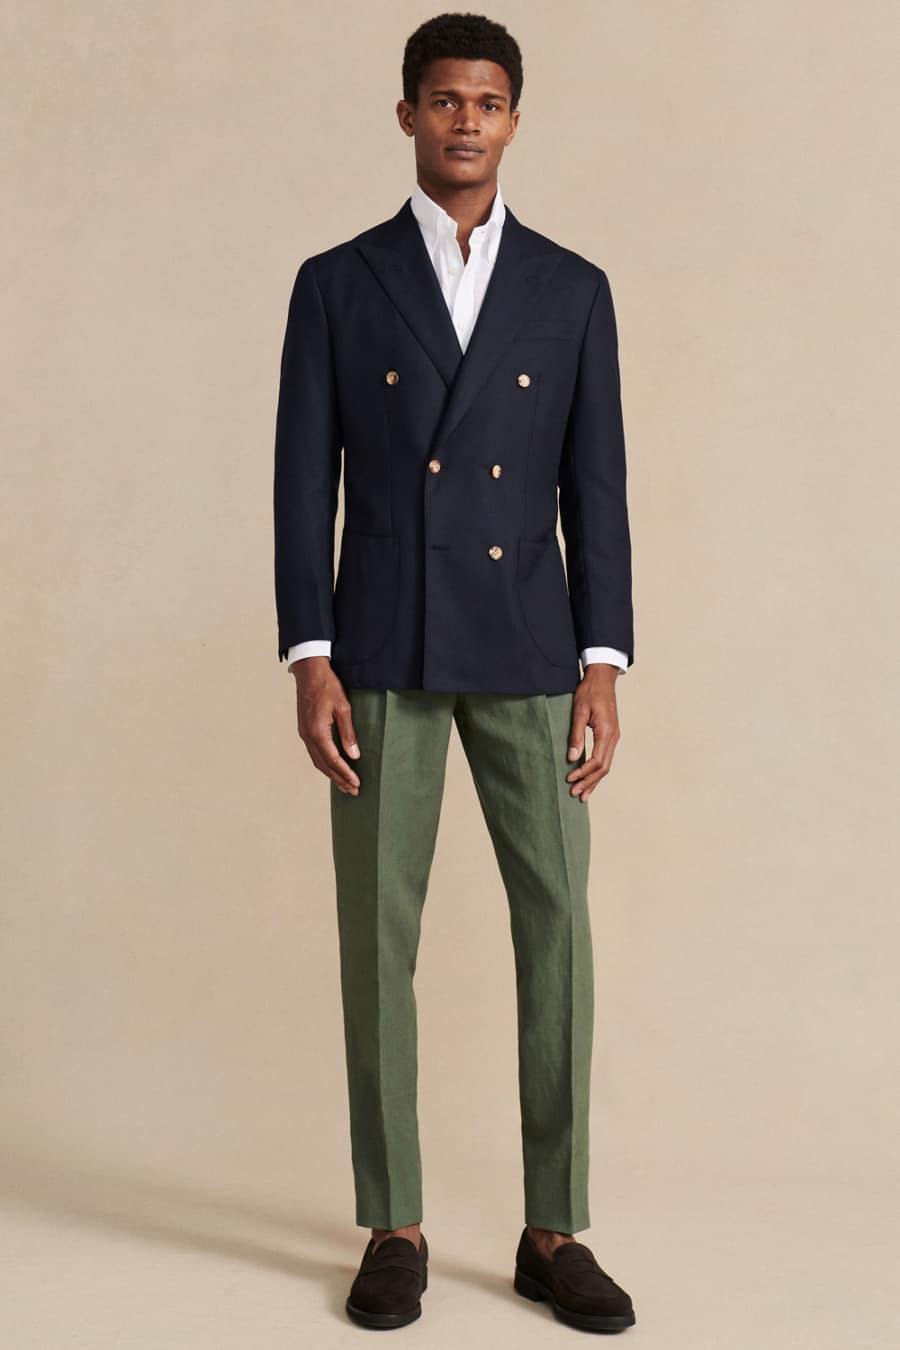 Men's green trousers, white shirt, navy boating blazer and brown suede loafers Ivy League outfit